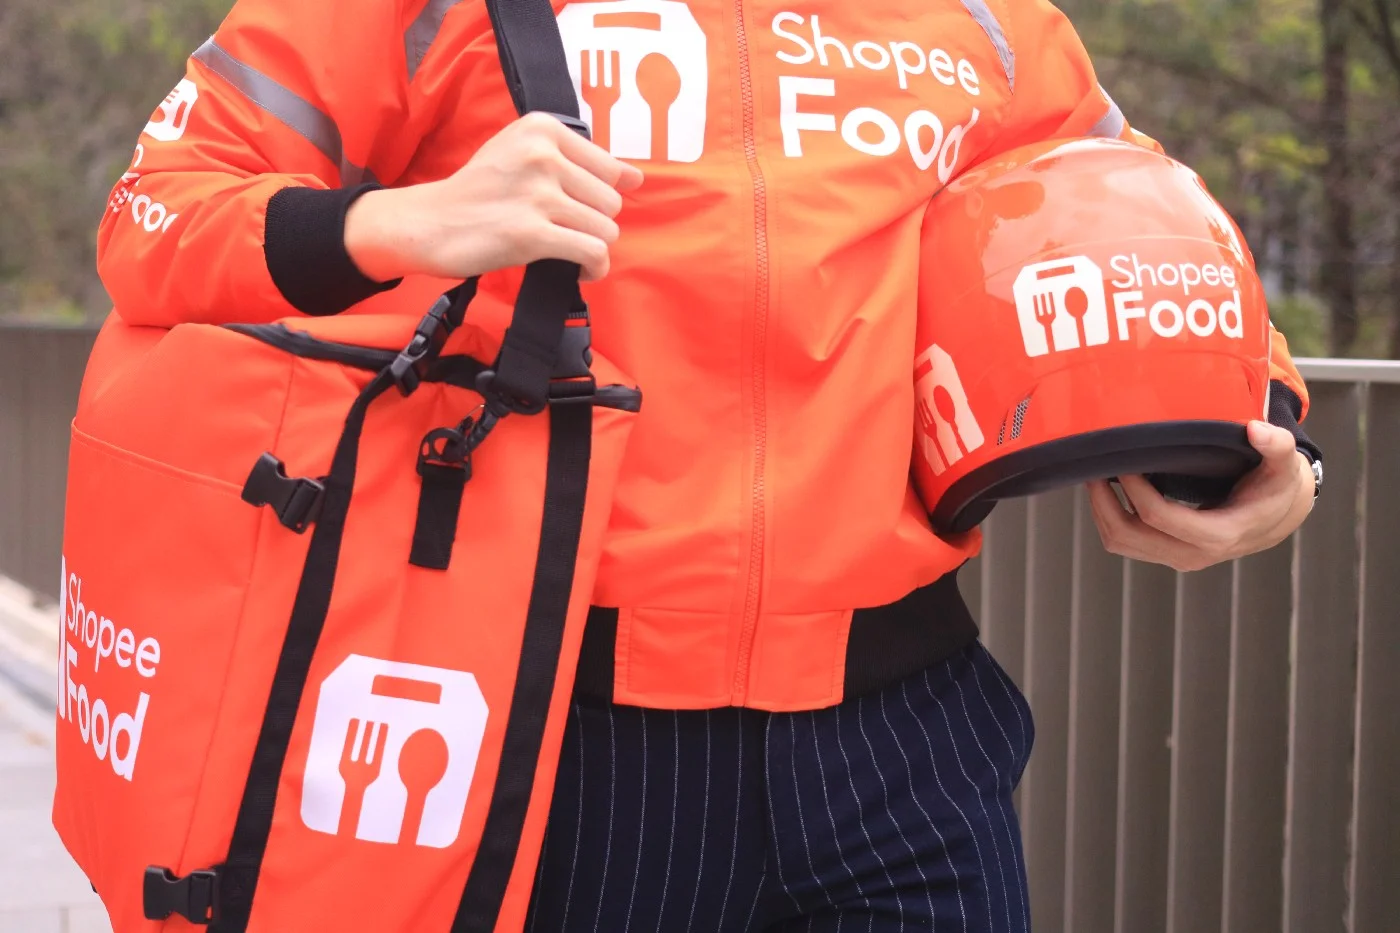 shopeefood delivery riders p-hailing